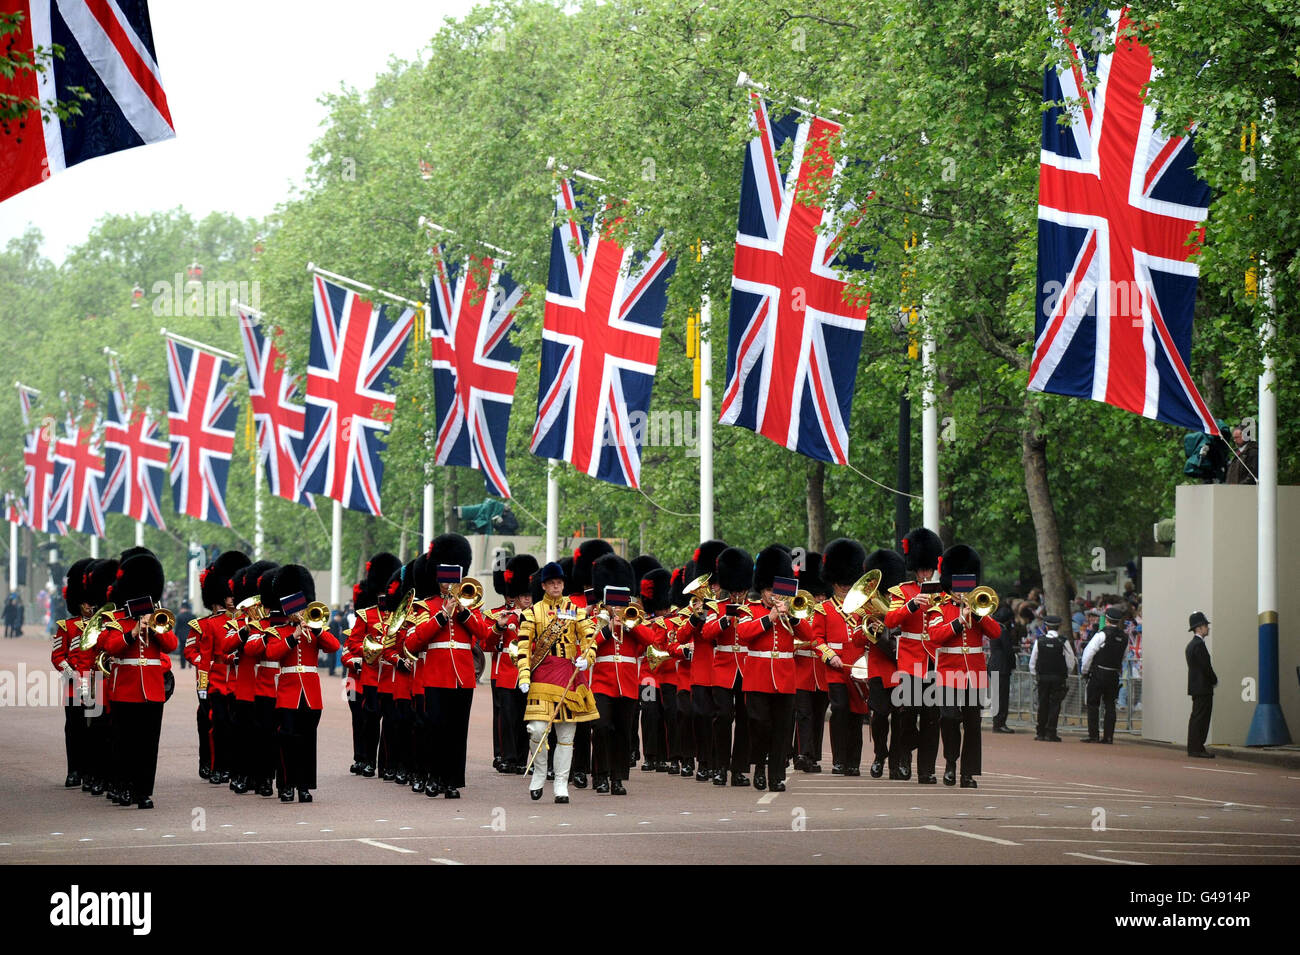 A marching band march up The Mall before the wedding of Prince William and Kate Middleton at Westminster Abbey. Stock Photo